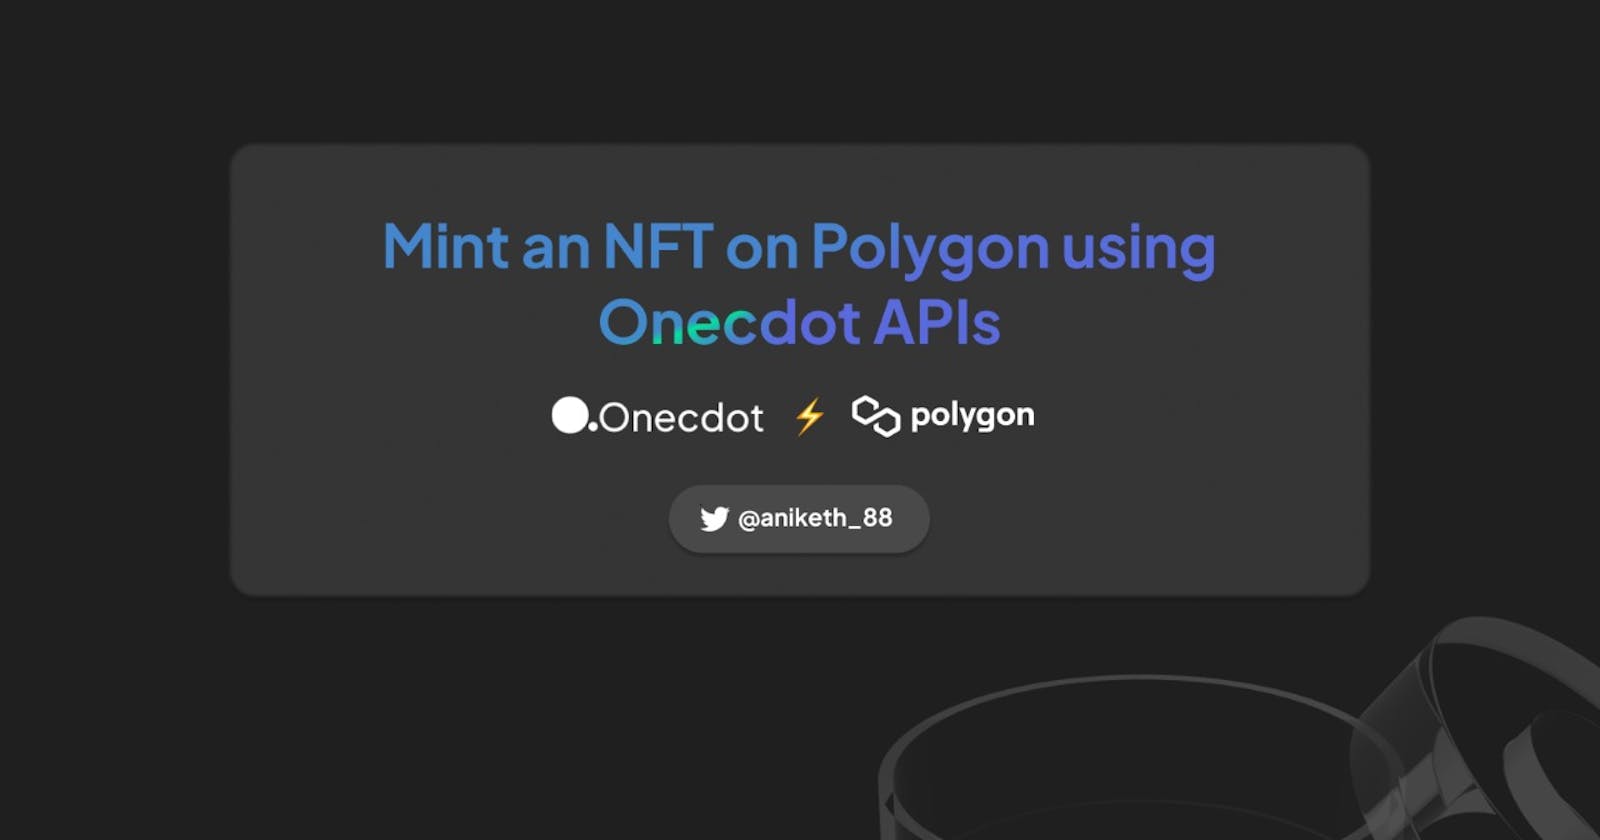 Mint an NFT on Polygon using Onecdot simple RESTful APIs 🚀